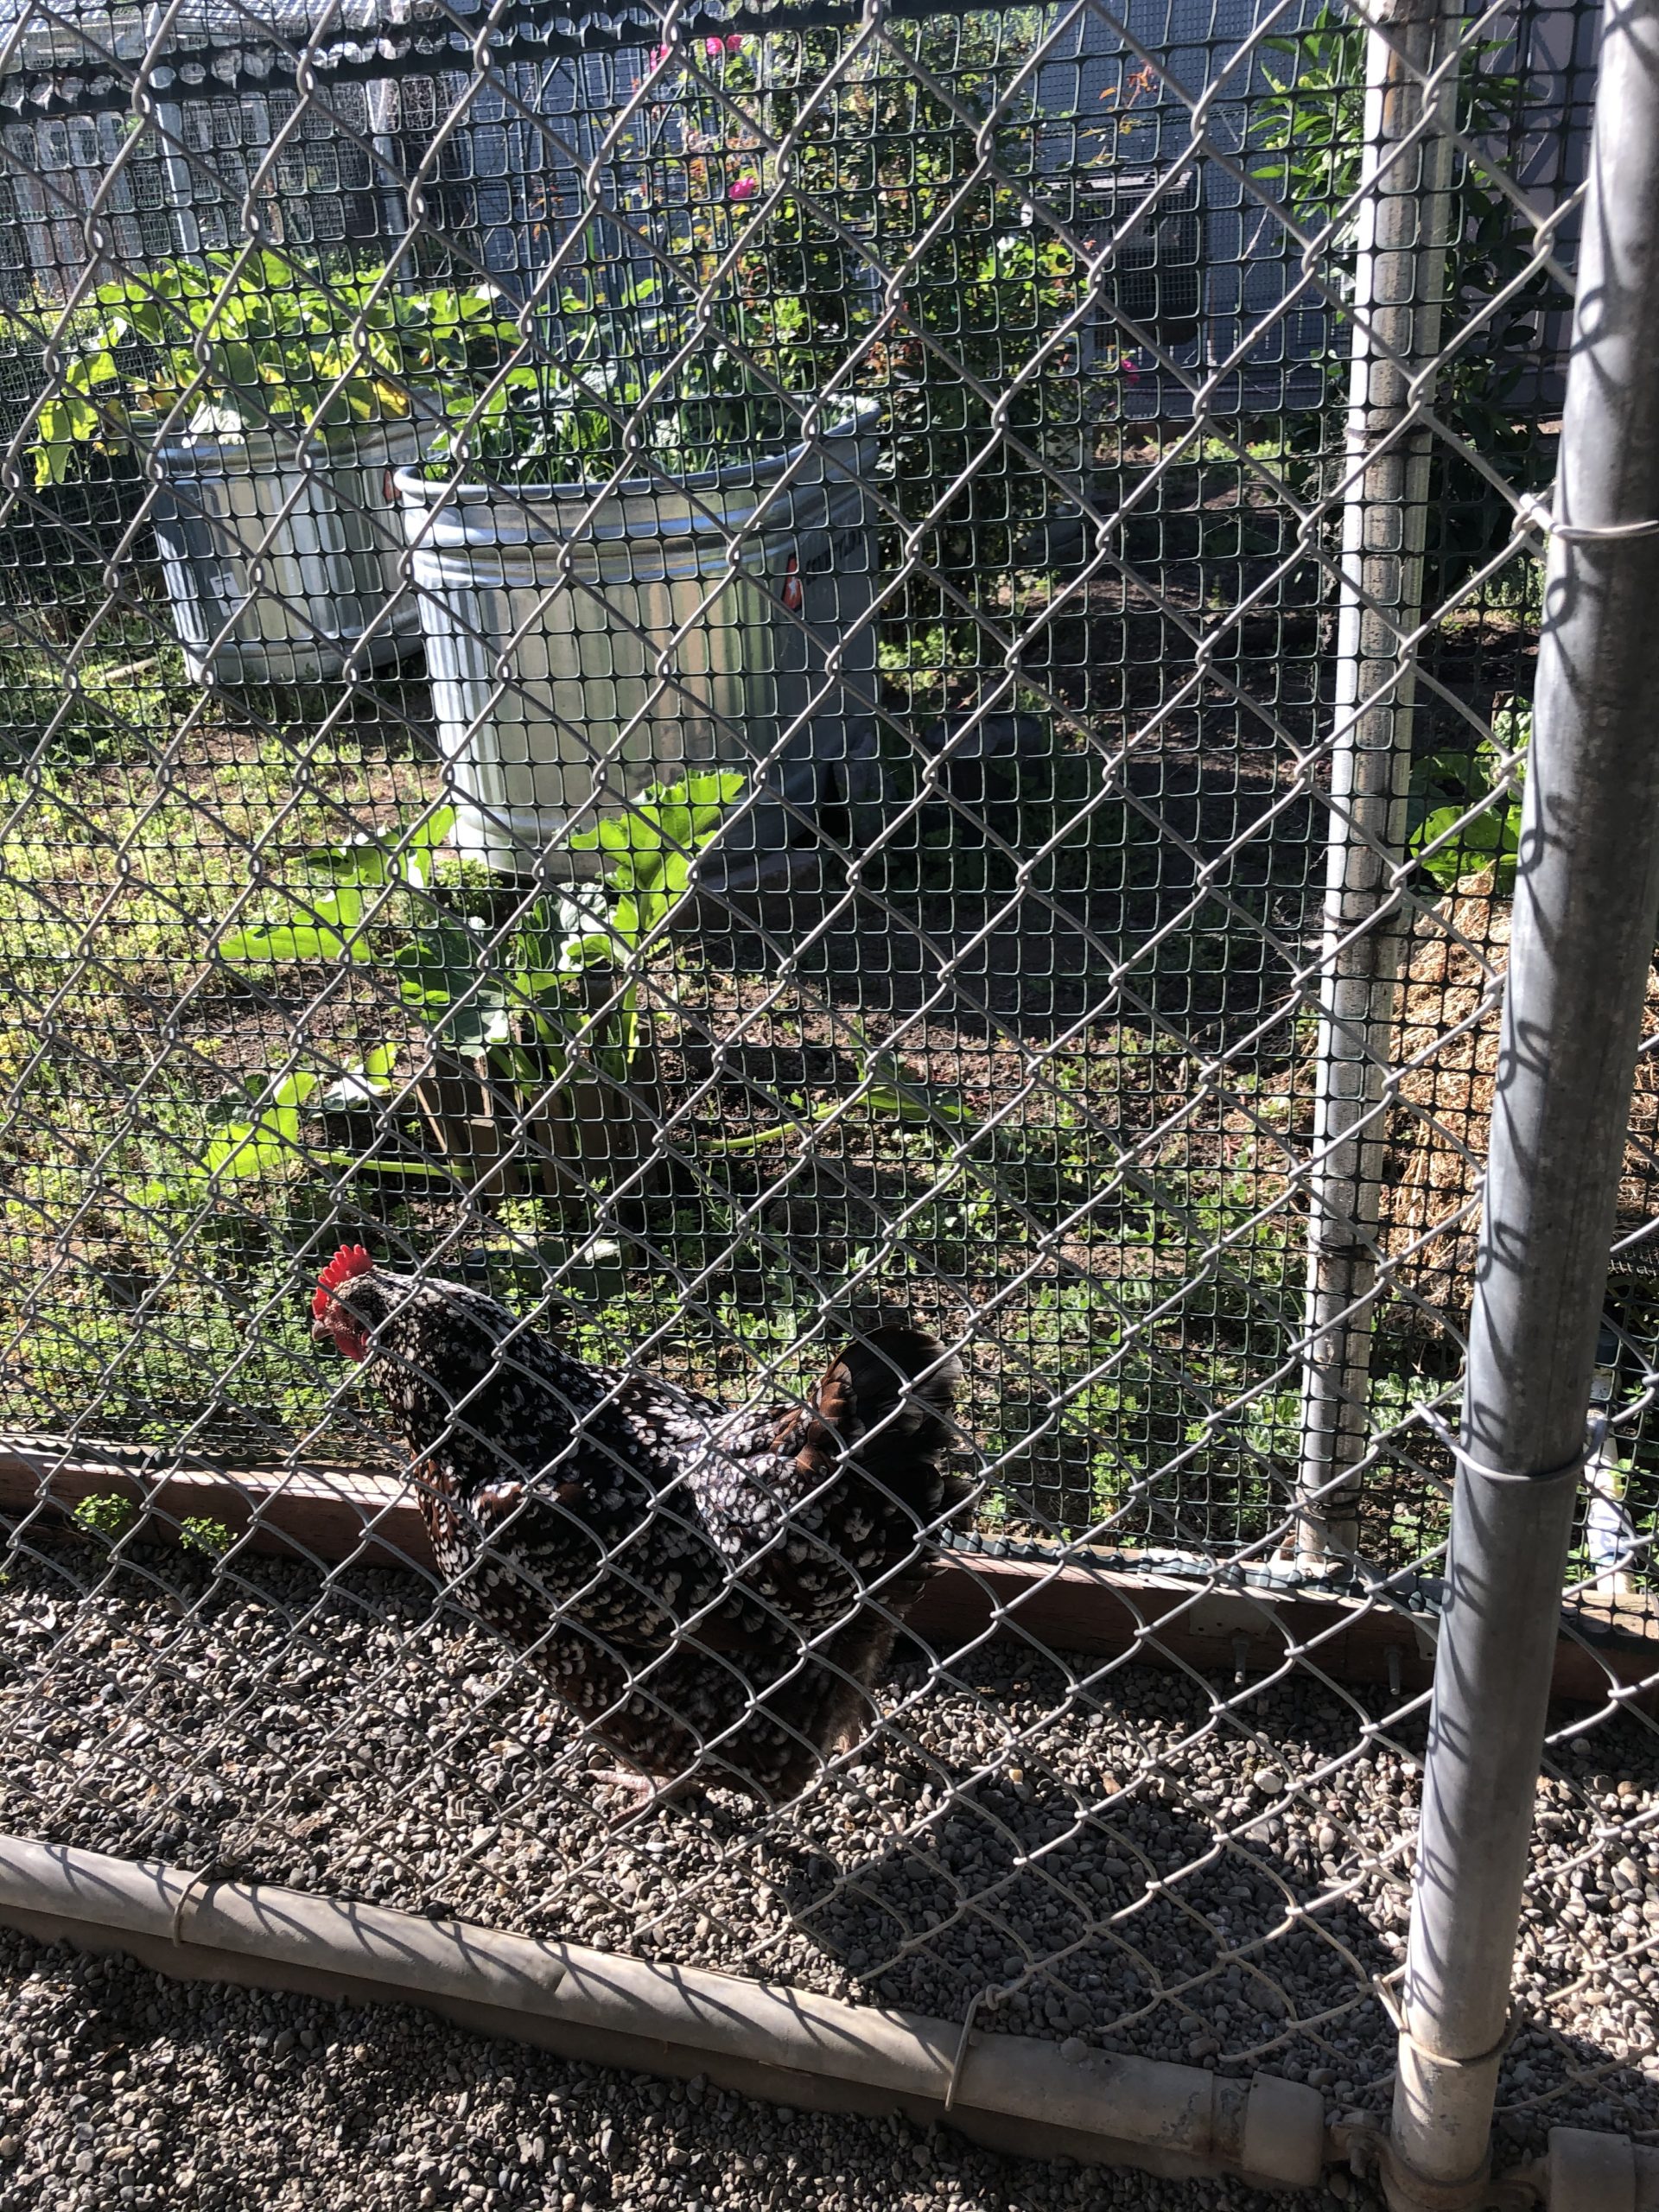 "Chicken TV" from the exercise runs